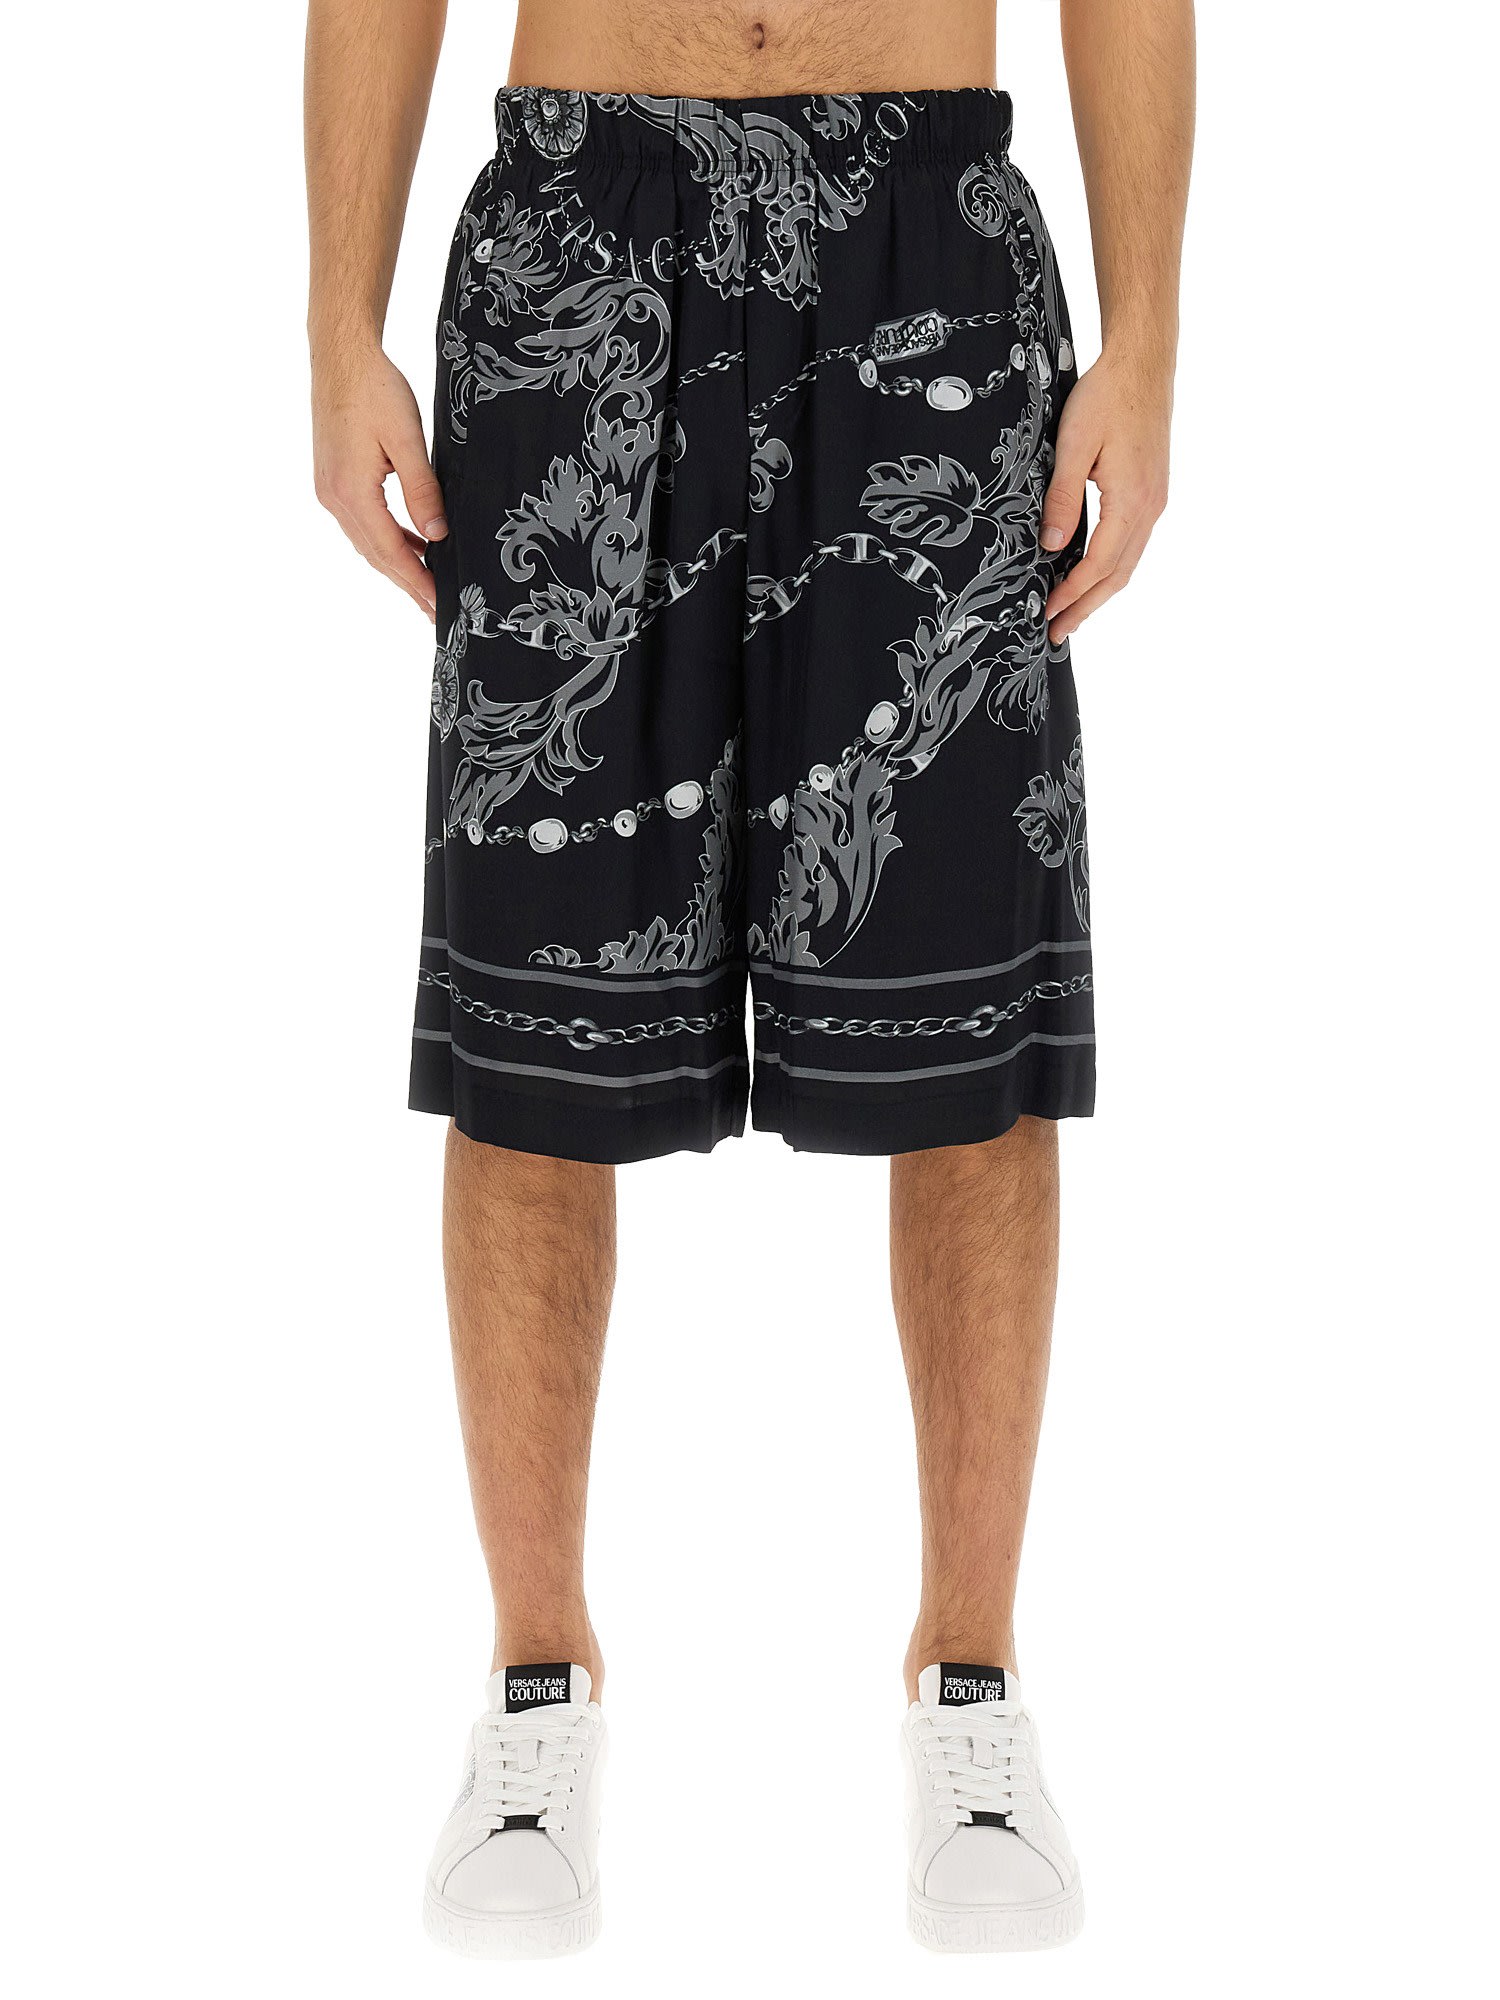 VERSACE JEANS COUTURE CHAIN COUTURE BERMUDA SHORTS